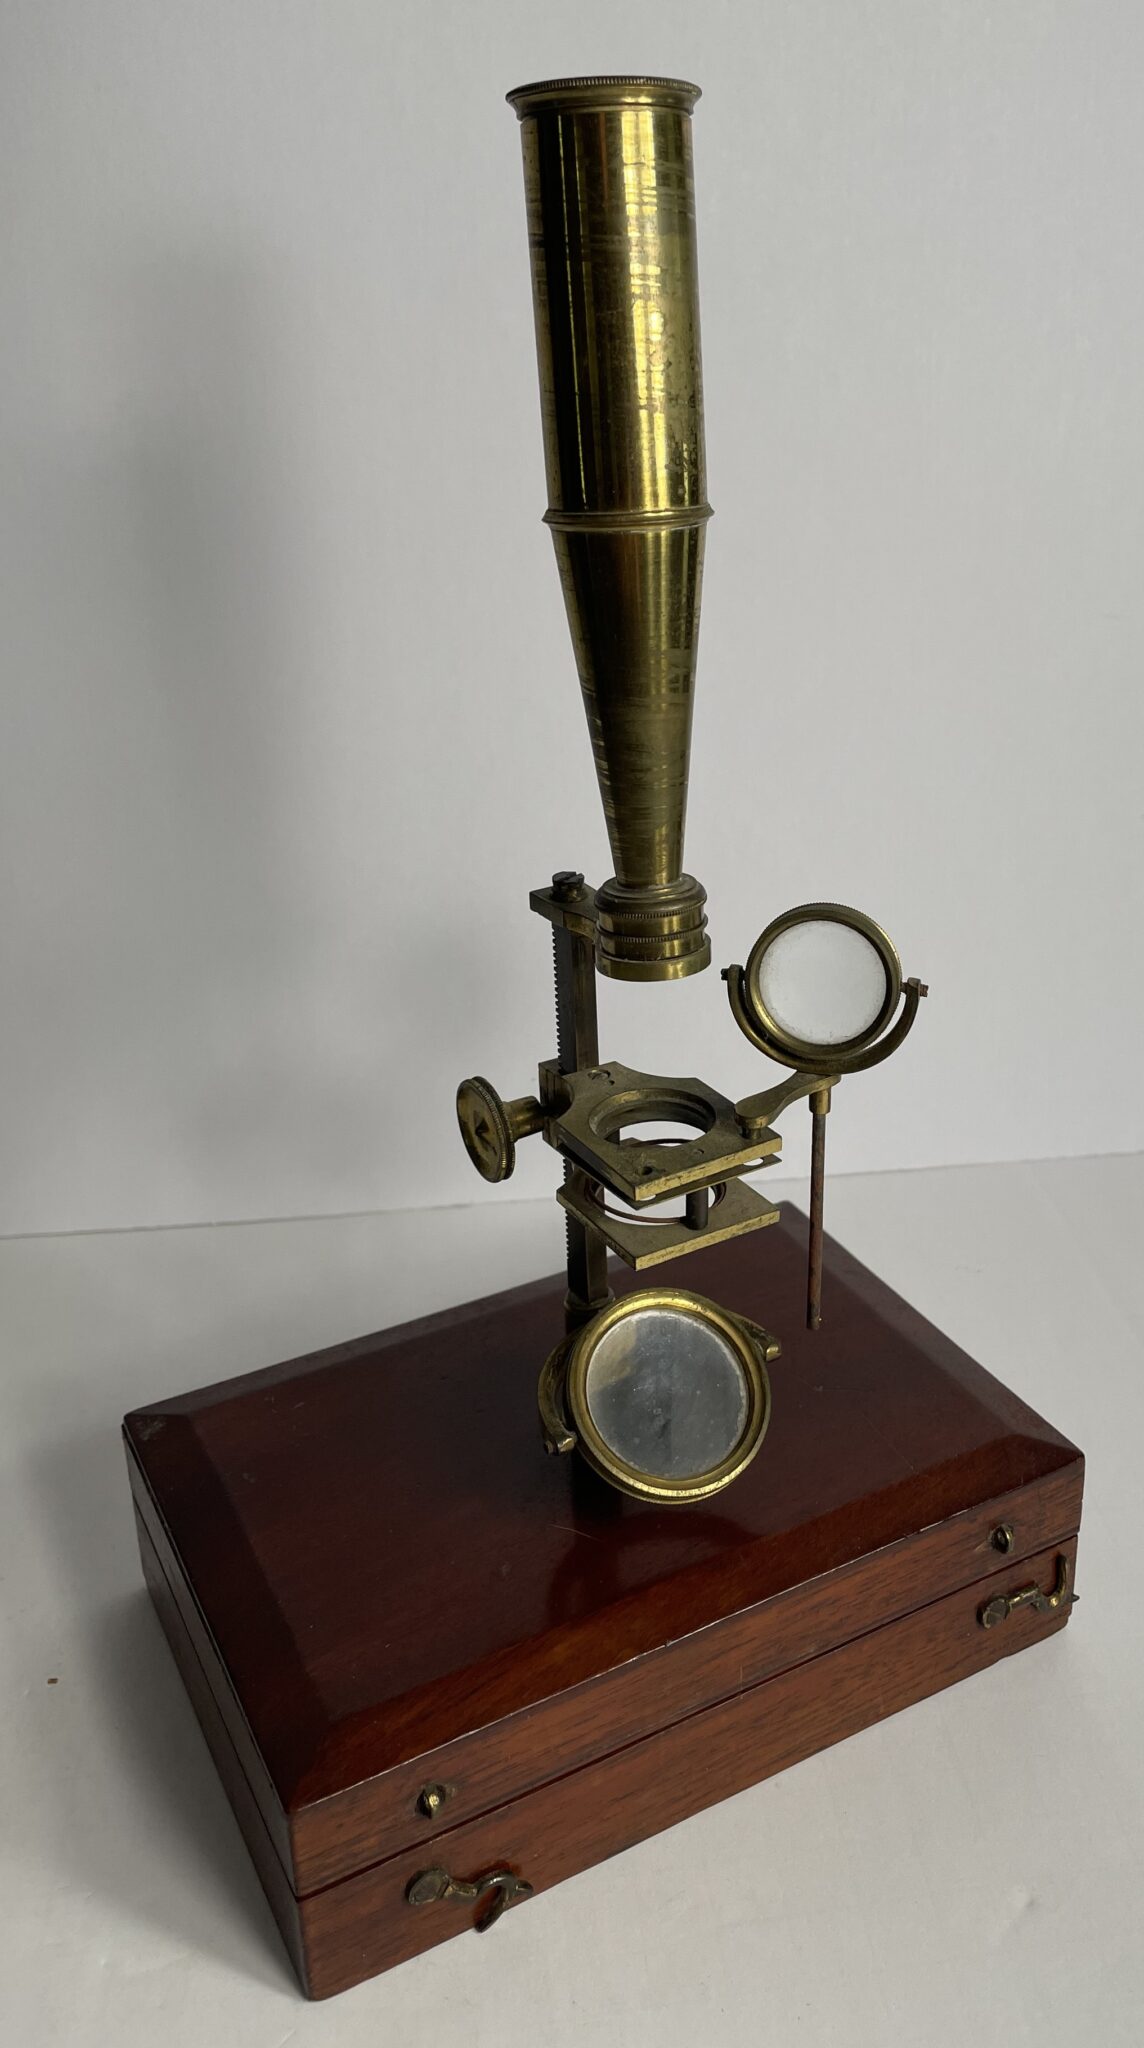 Unsigned Gould/Cary Type compound and simple microscope.